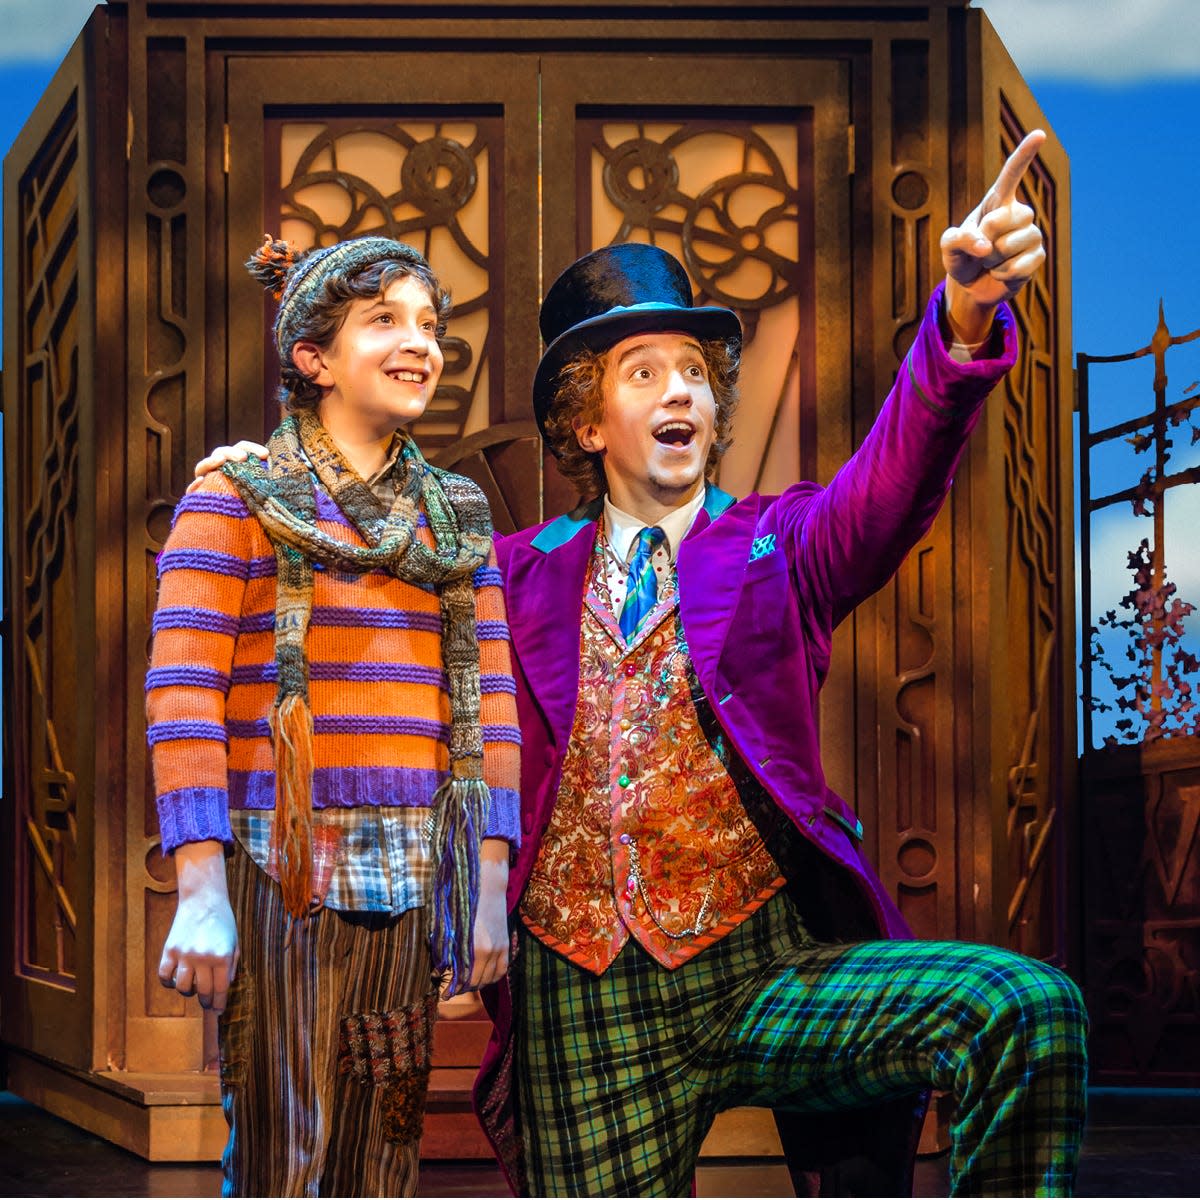 The musical "Charlie and the Chocolate Factory" will be shown at 7:30 p.m. Wednesday at Stephens Auditorium.